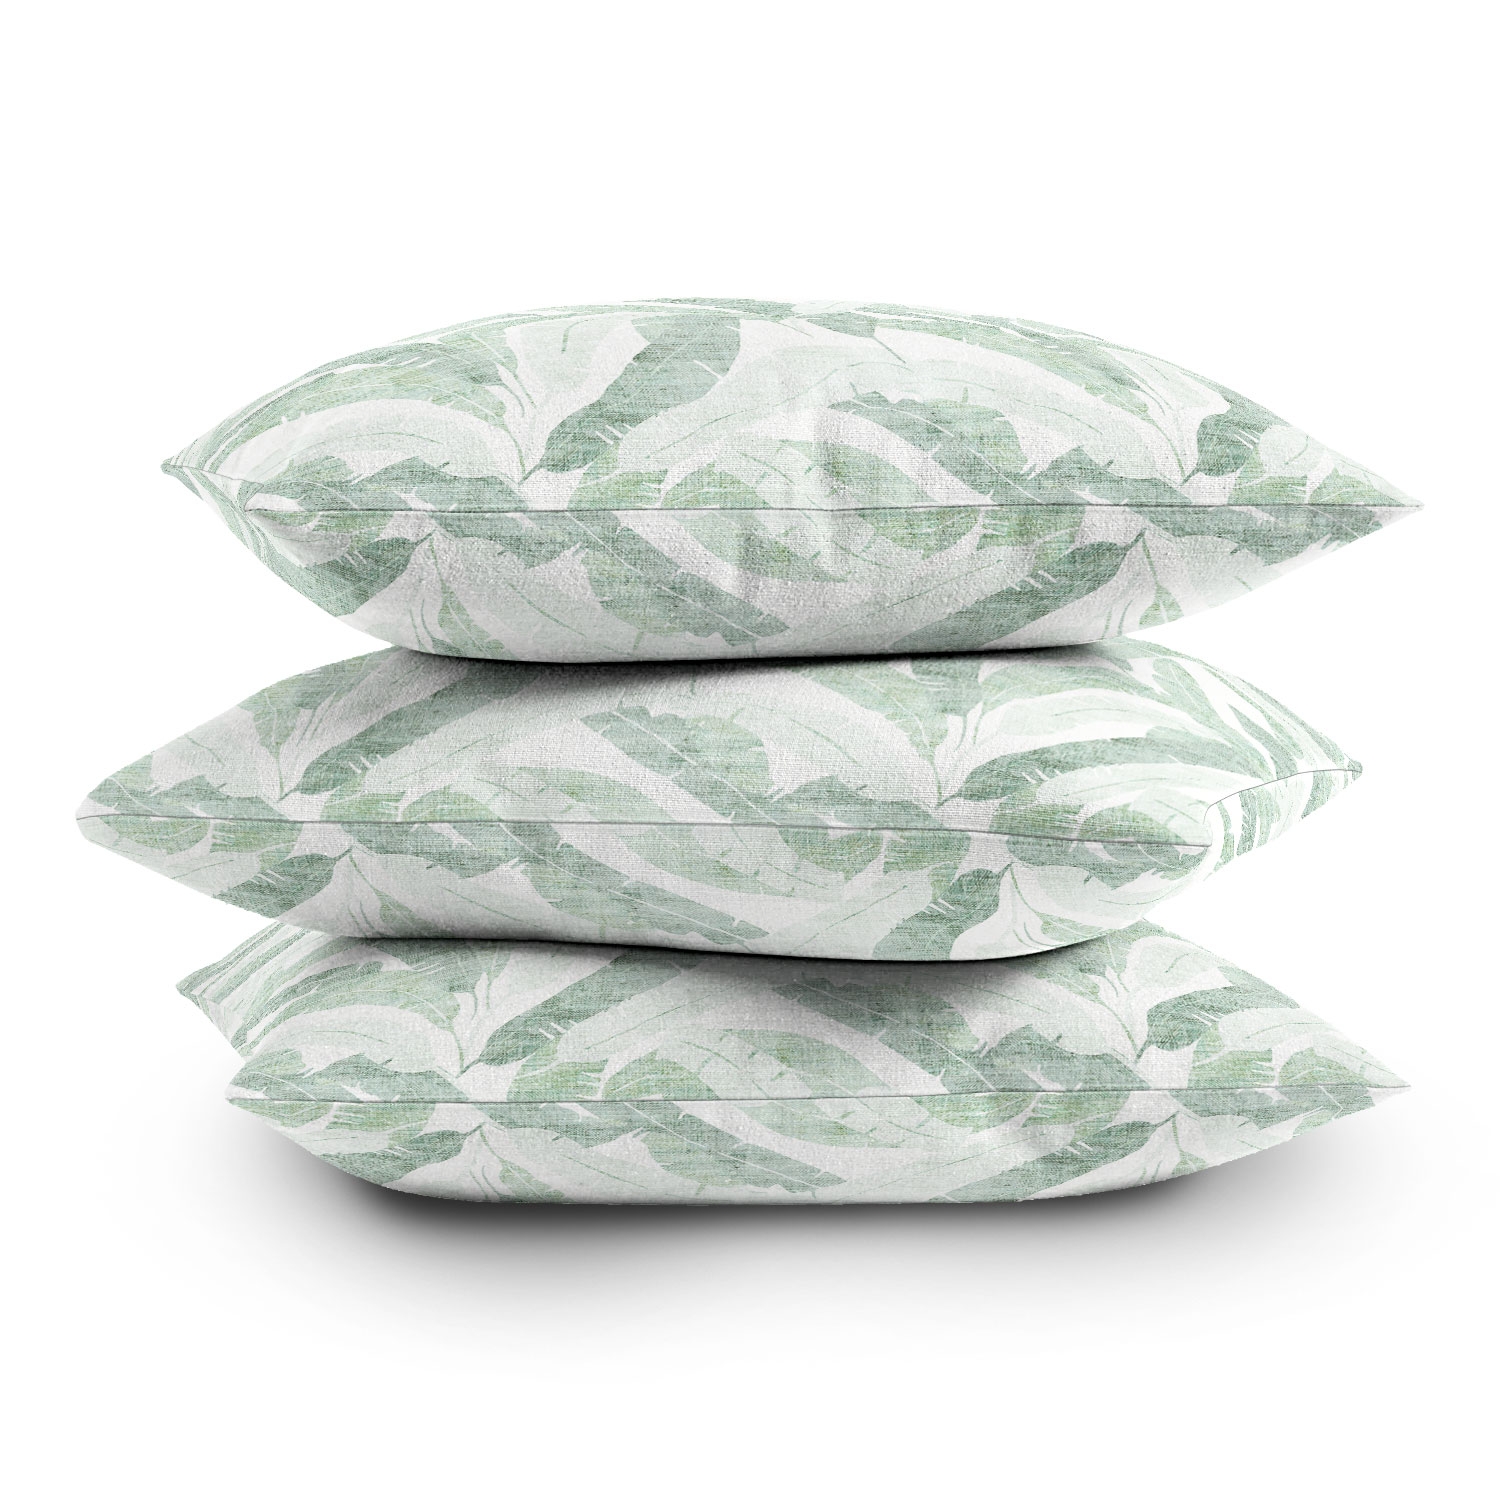 Banana Leaf Light by Holli Zollinger - Outdoor Throw Pillow 20" x 20" - Image 3